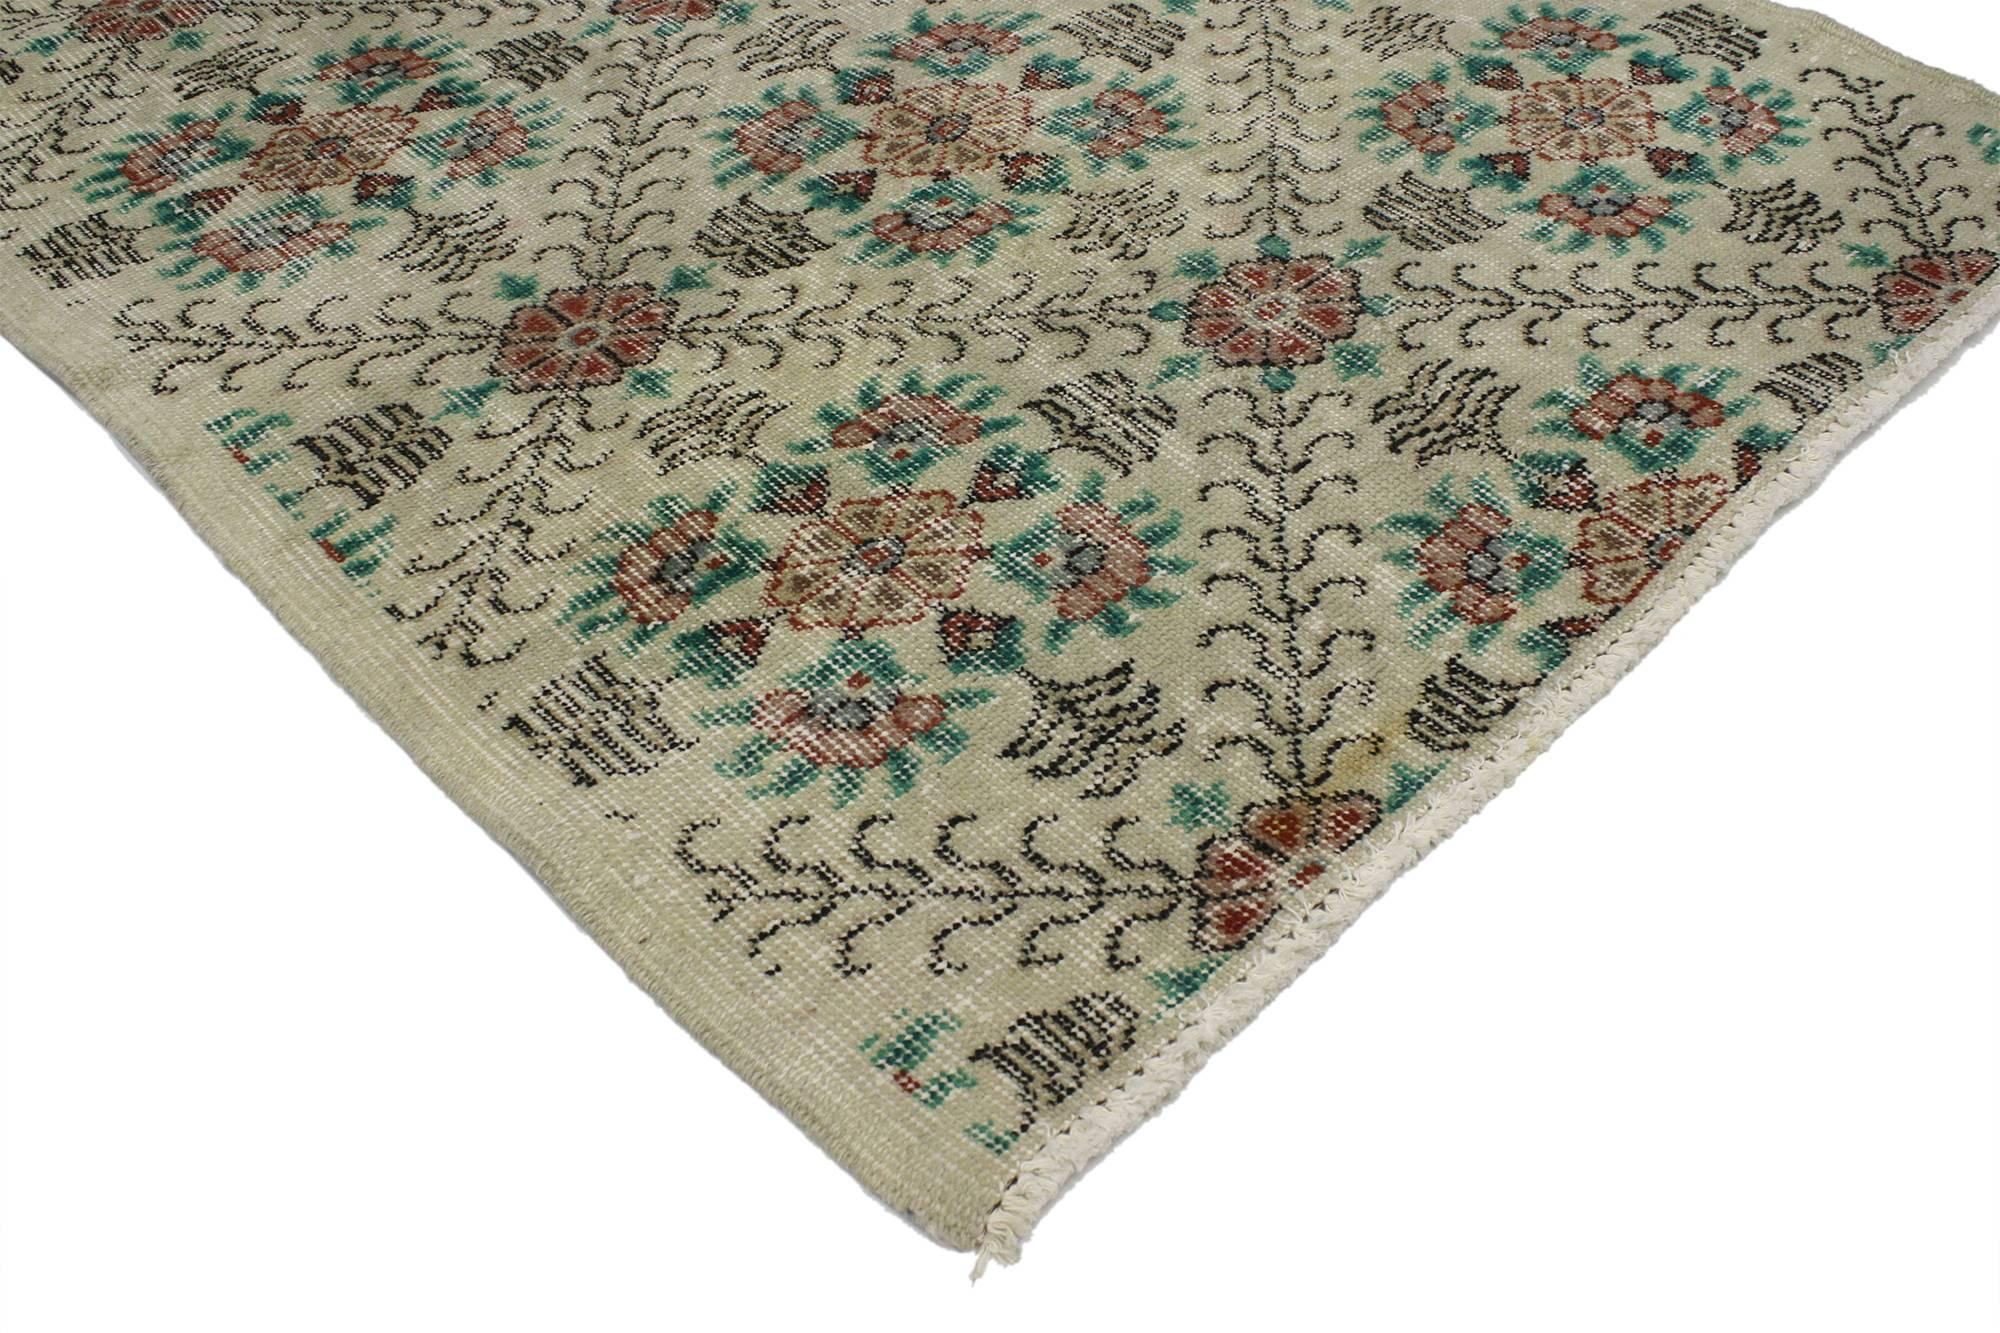 51970, distressed vintage Turkish Sivas rug with shabby chic farmhouse style. This distressed vintage Turkish Sivas rug with modern Industrial Art Deco style can make an interior space feel both comfortable and modern yet, full of character.